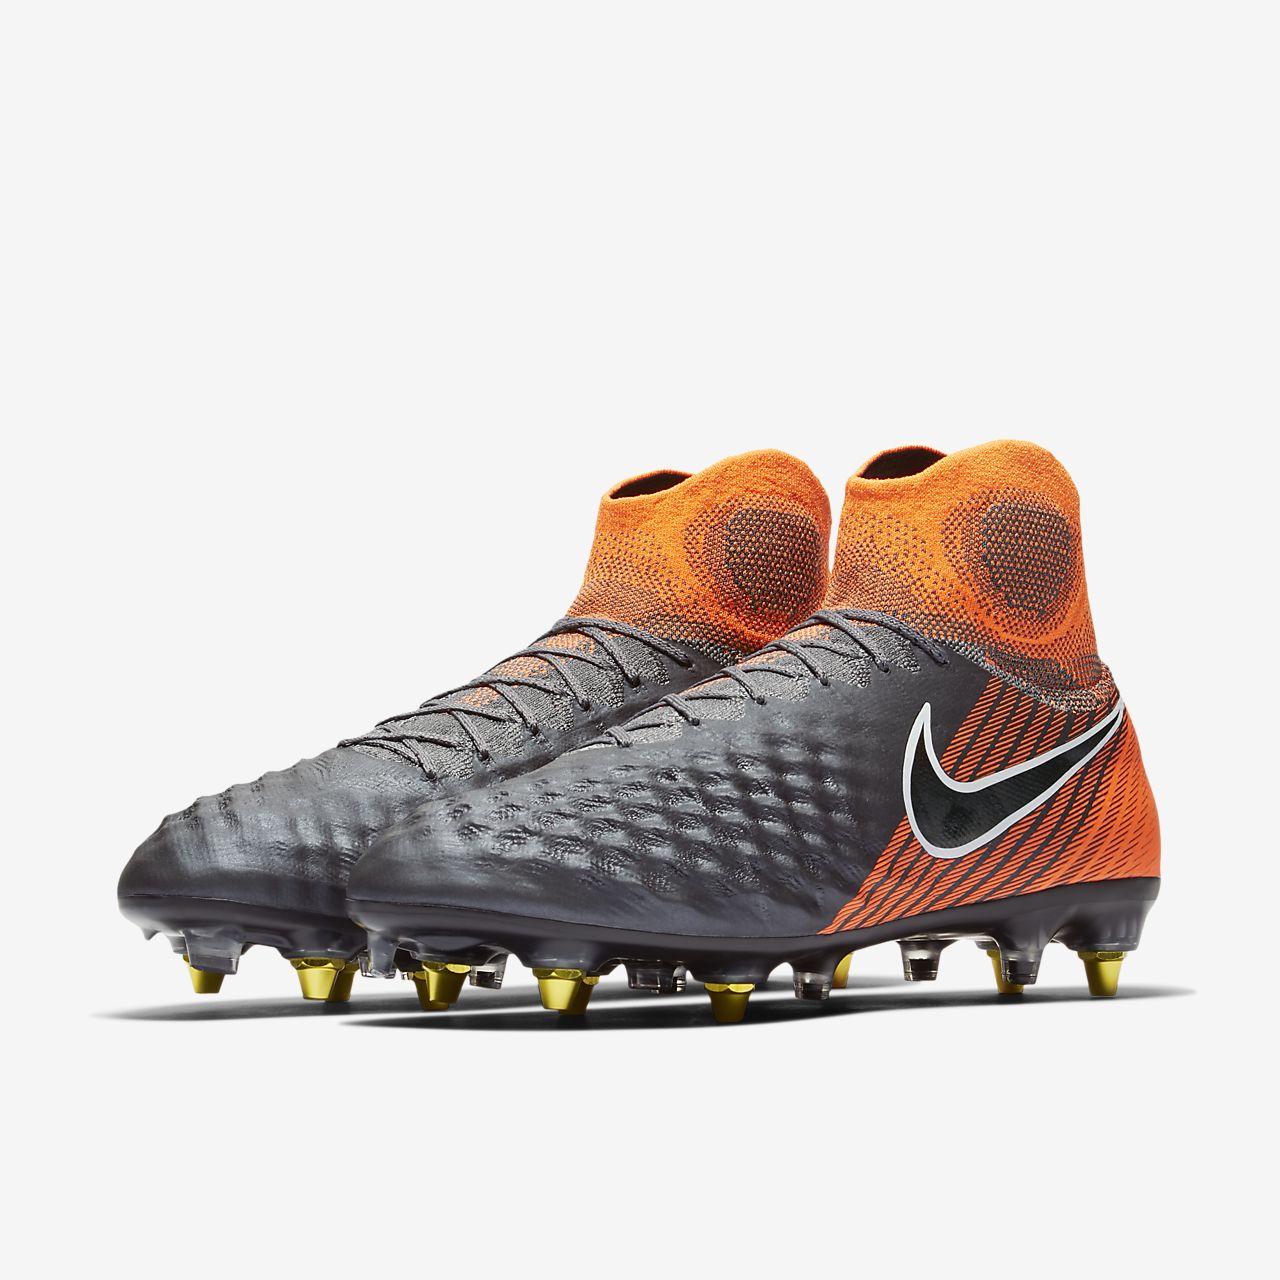 Nike Magista Opus II FG Soccer Cleat 843813 409 9.5 for sale